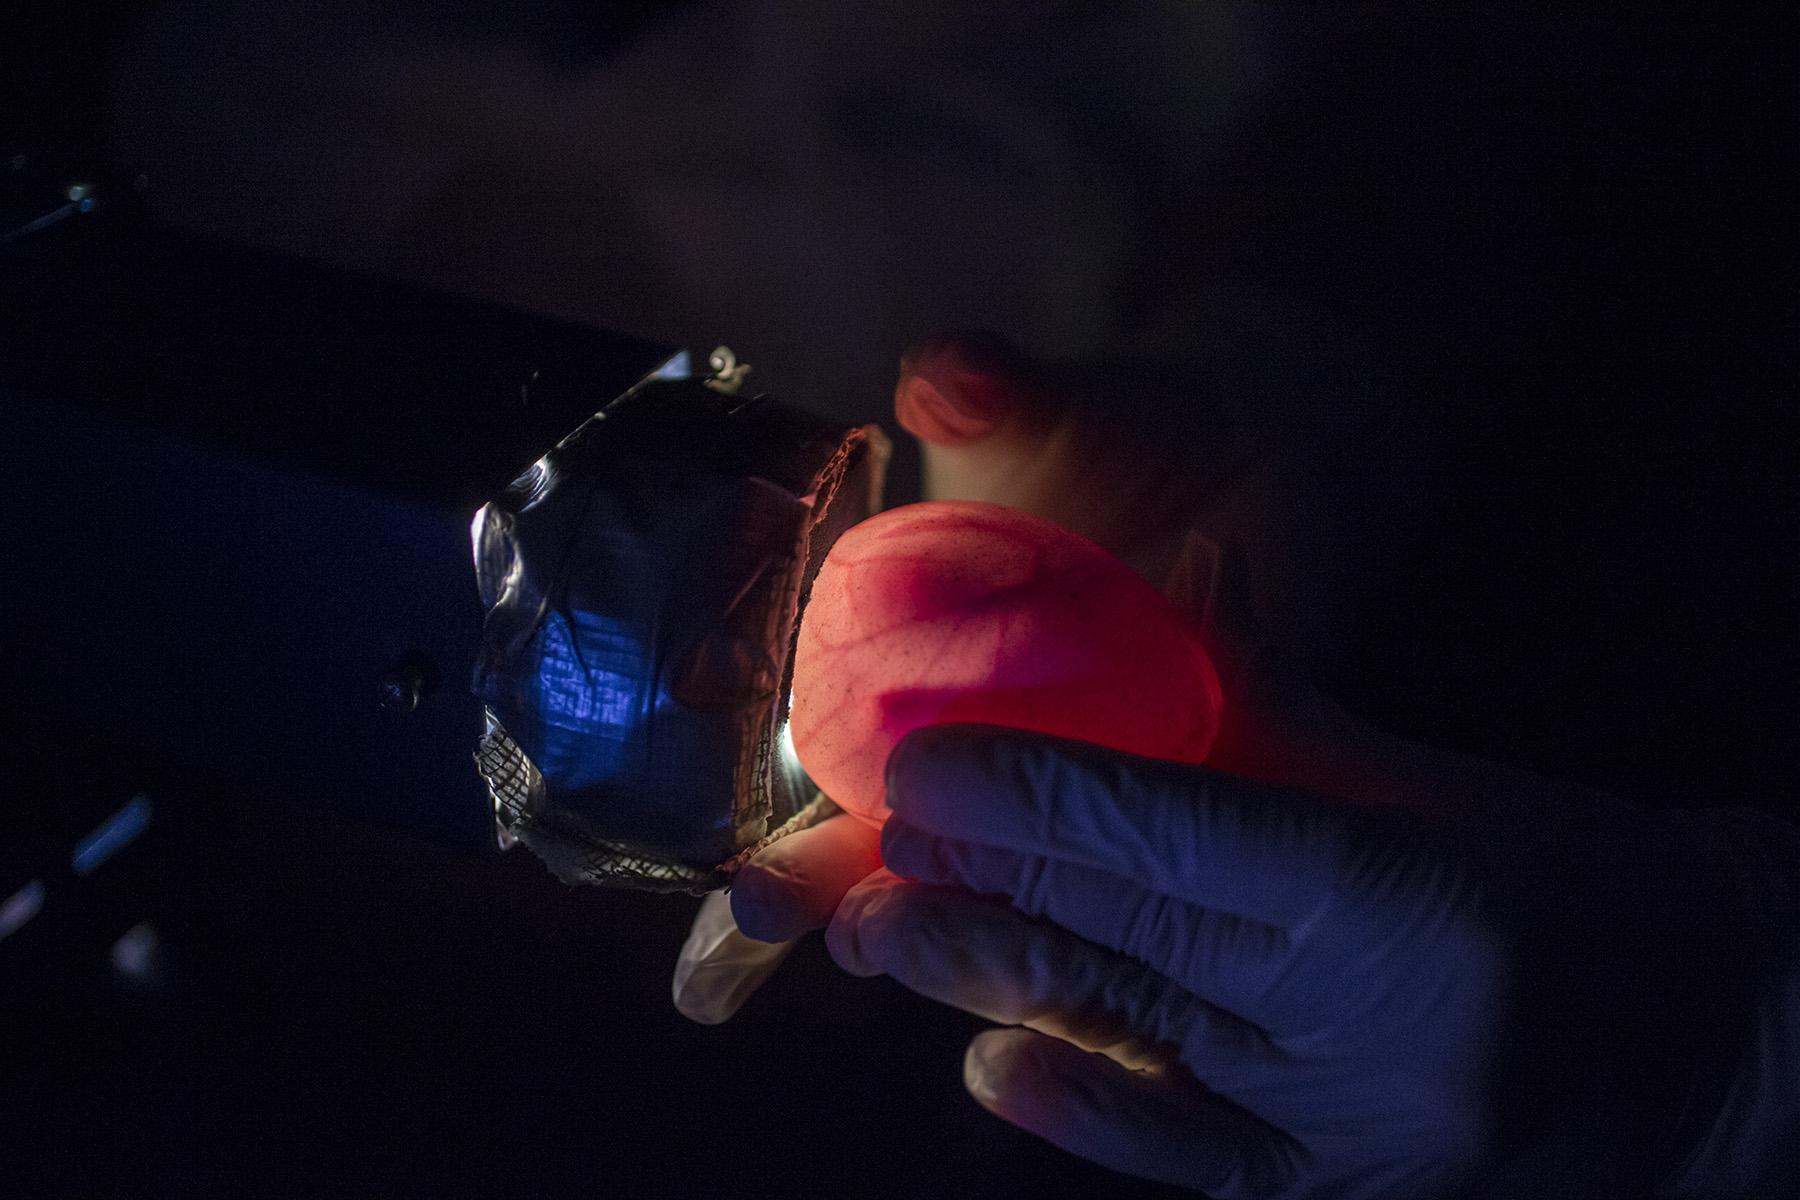 To monitor the development of penguin eggs, Shedd Aquarium staff use a process known as candling, which involves holding a strong light to the egg to observe inside. (Brenna Hernandez / Shedd Aquarium)